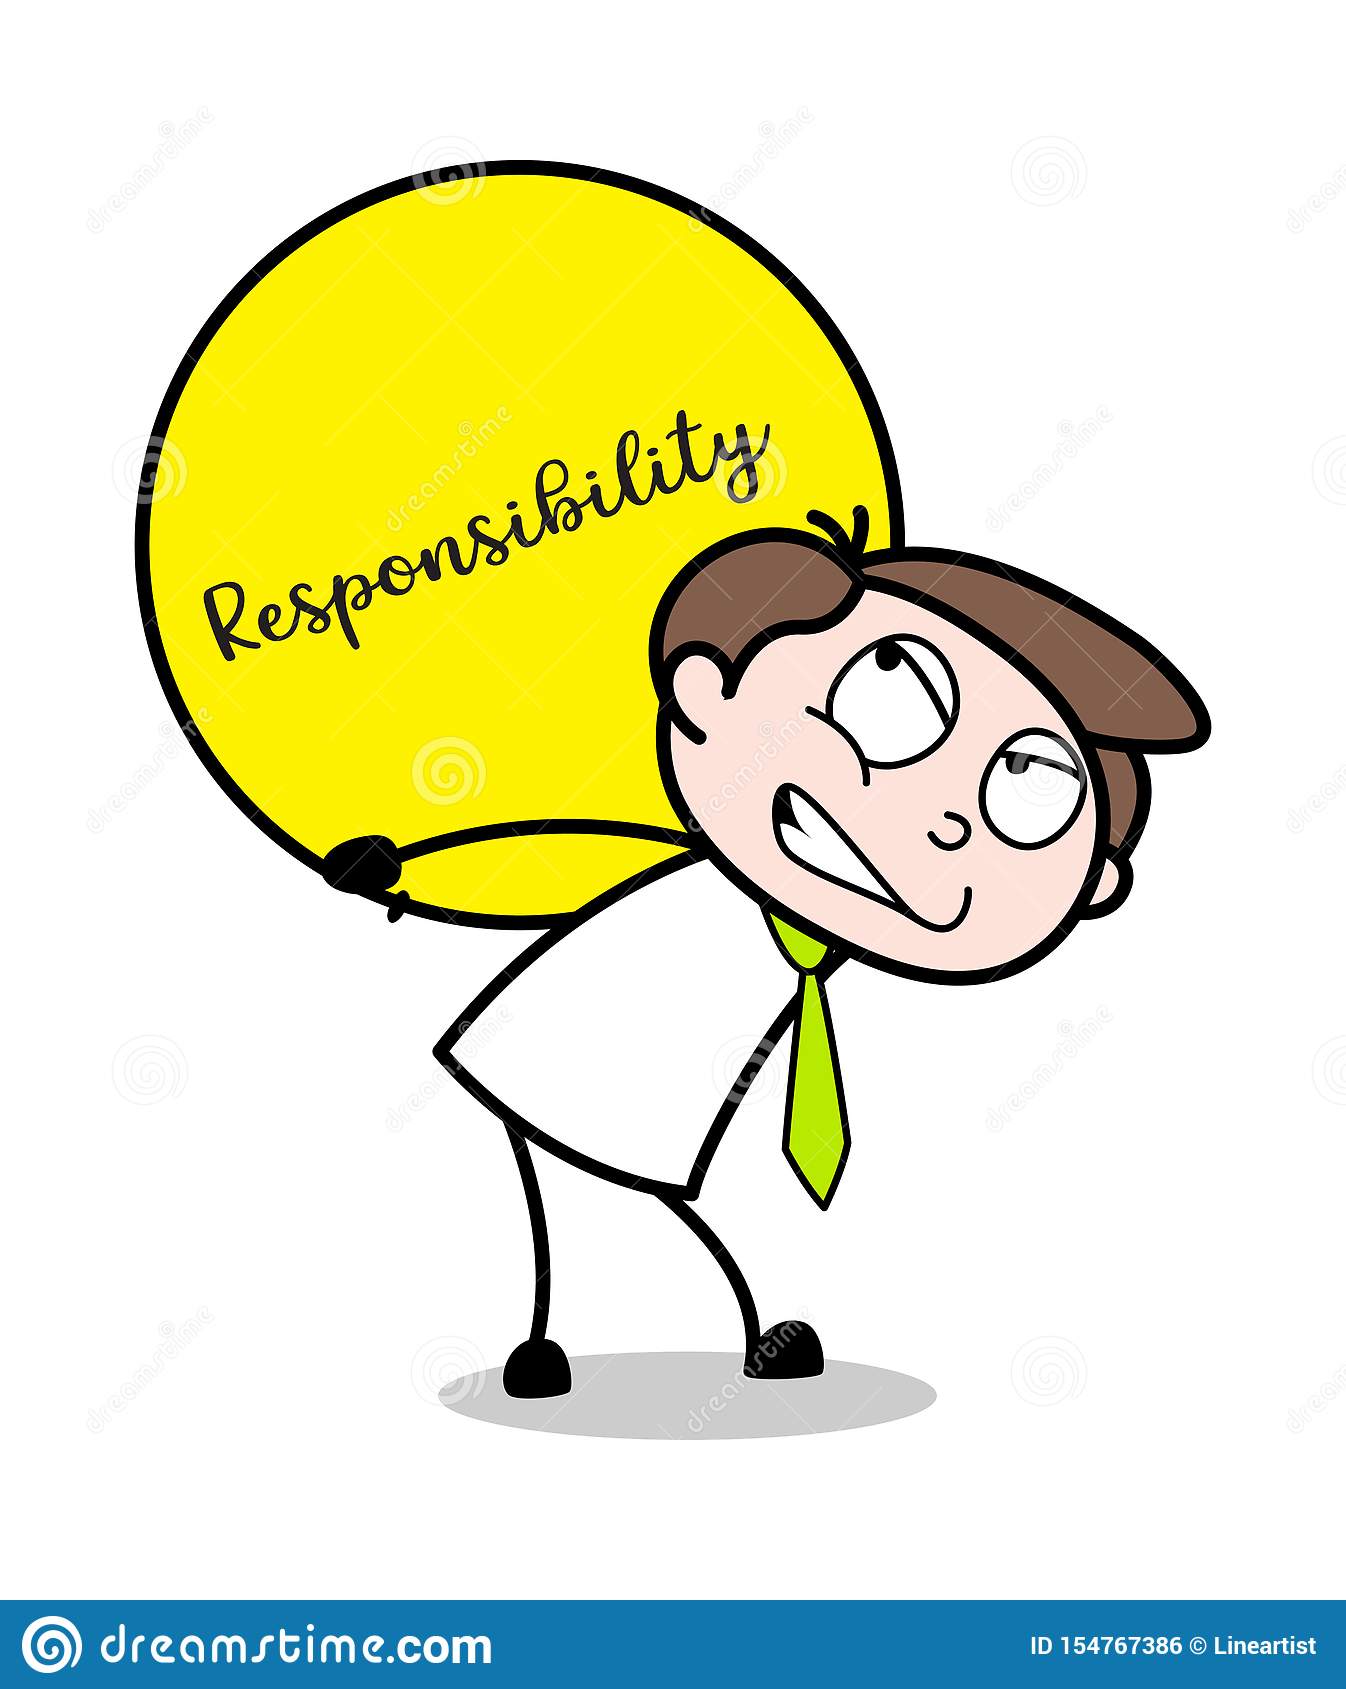 responsibility images